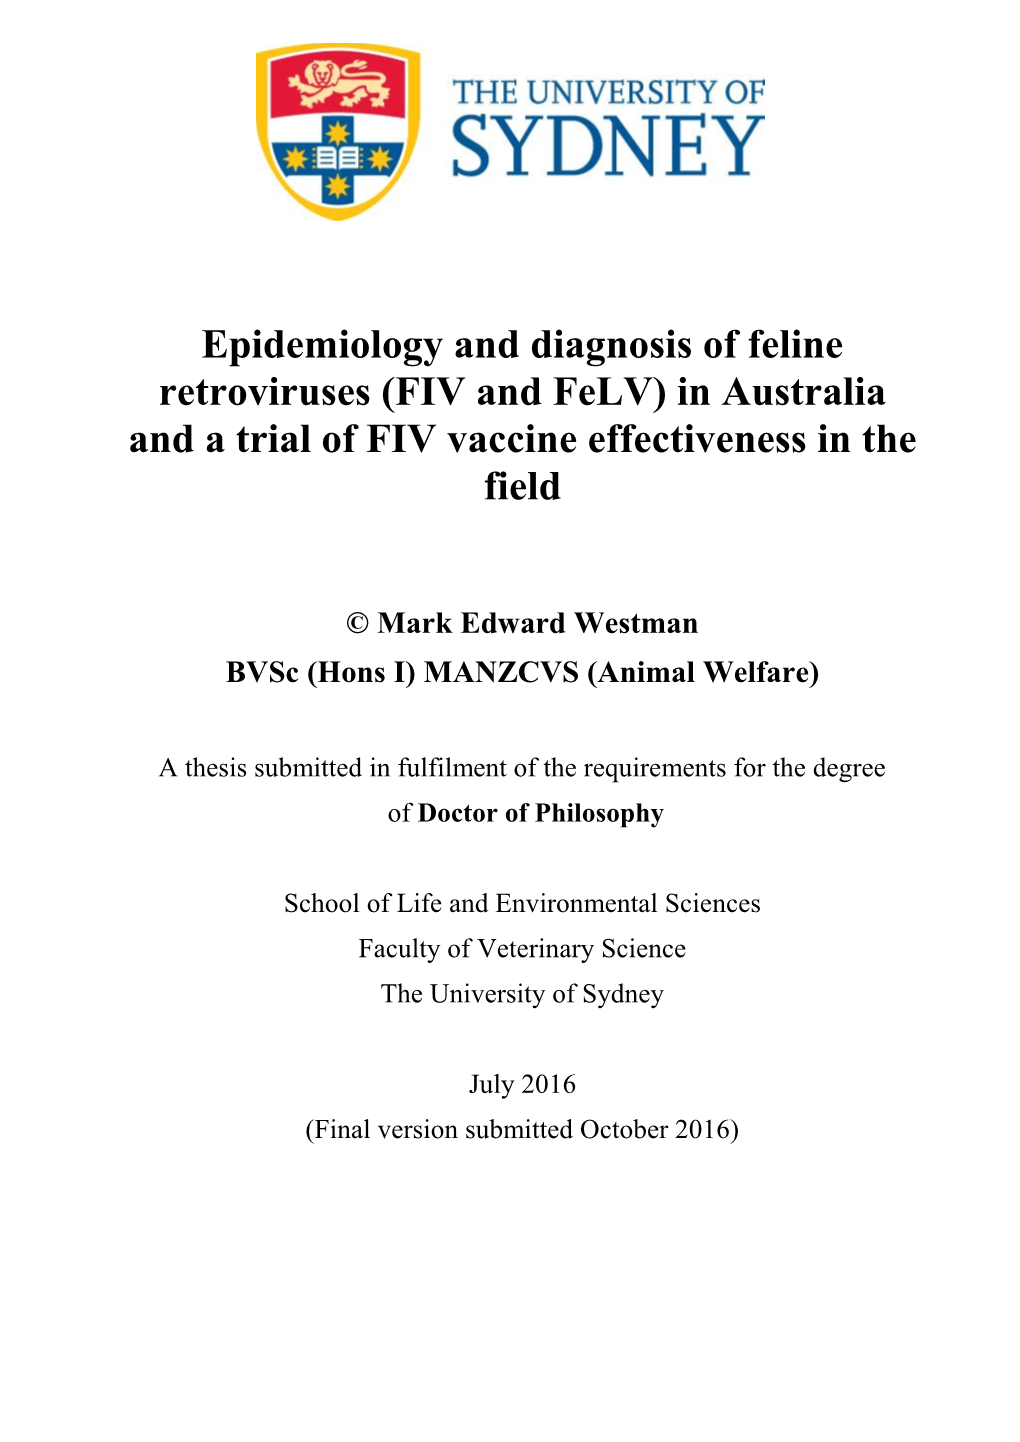 FIV and Felv) in Australia and a Trial of FIV Vaccine Effectiveness in the Field